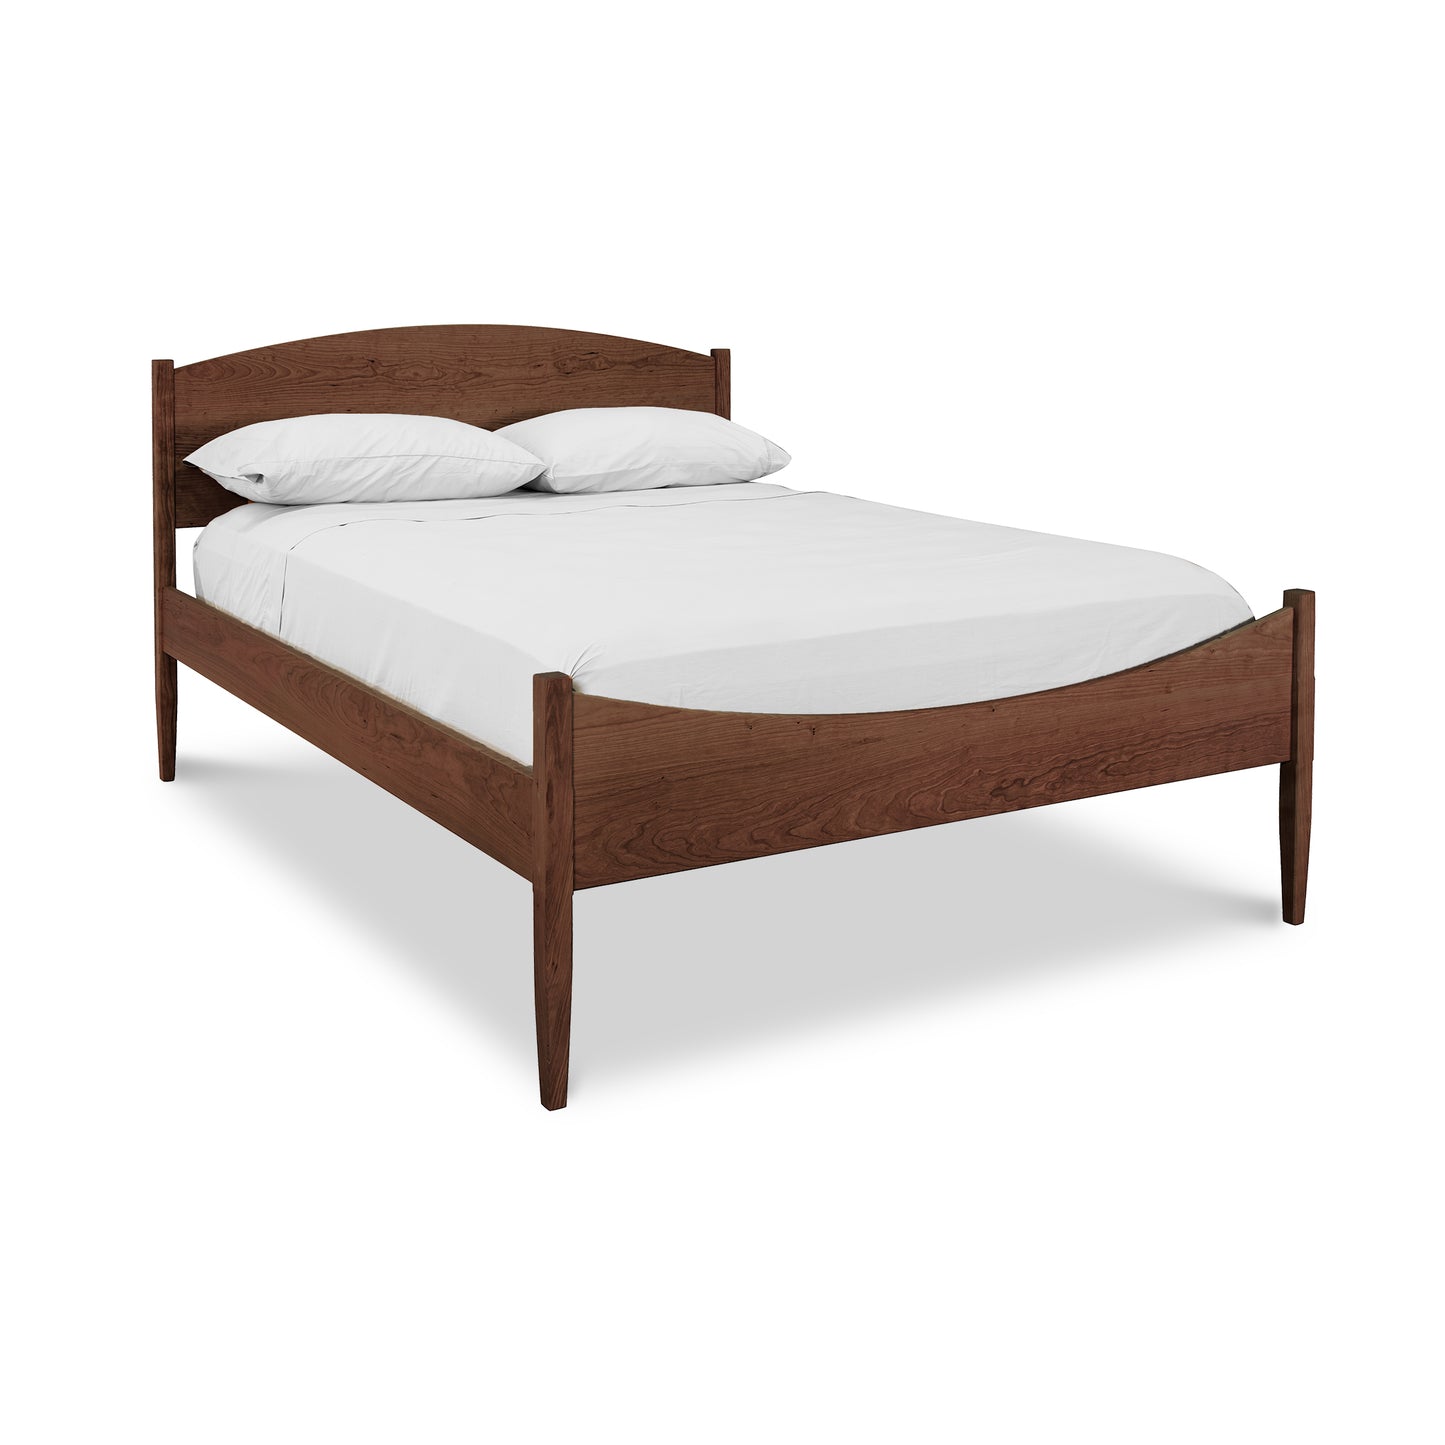 A simple Maple Corner Woodworks Vermont Shaker Moon Bed wooden bed frame with a headboard and footboard, finished in dark brown, supporting a white mattress with two white pillows, displayed against a plain white background.